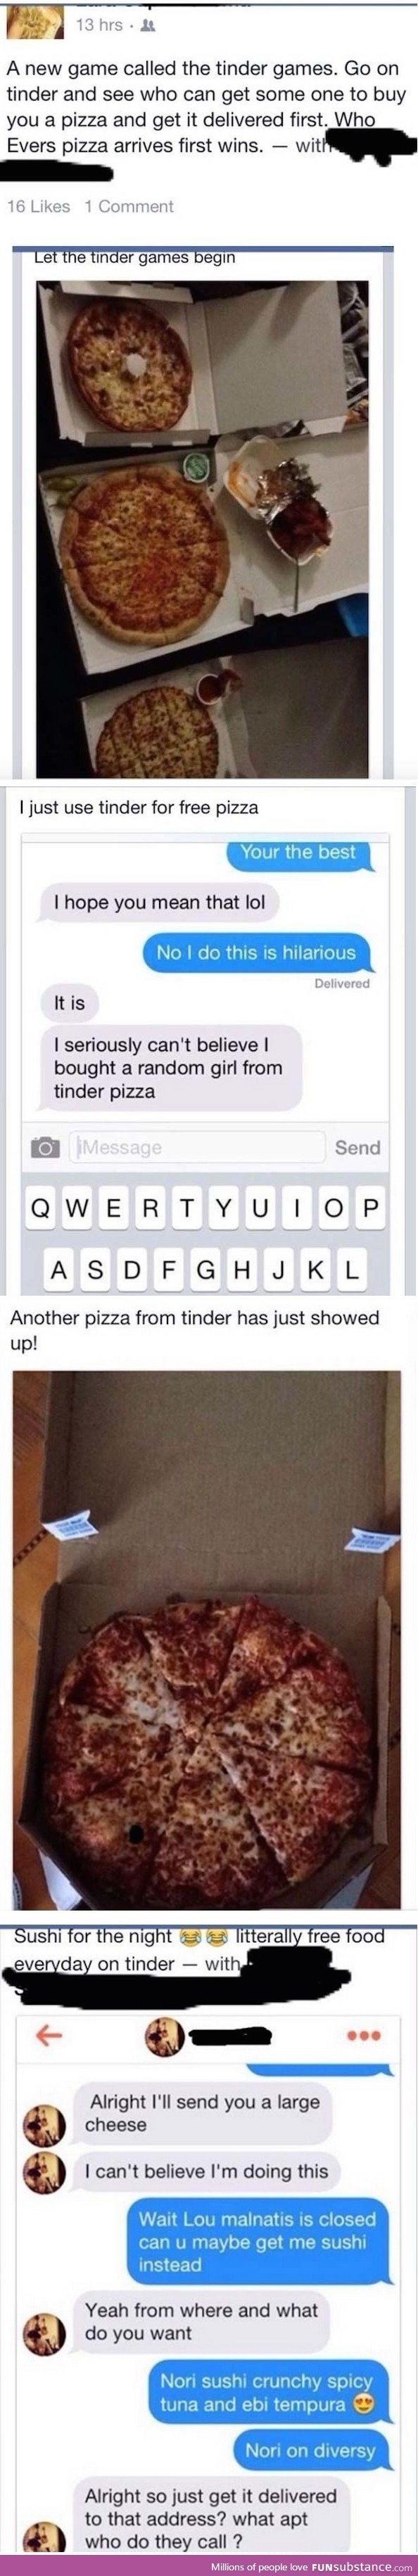 The tinder games